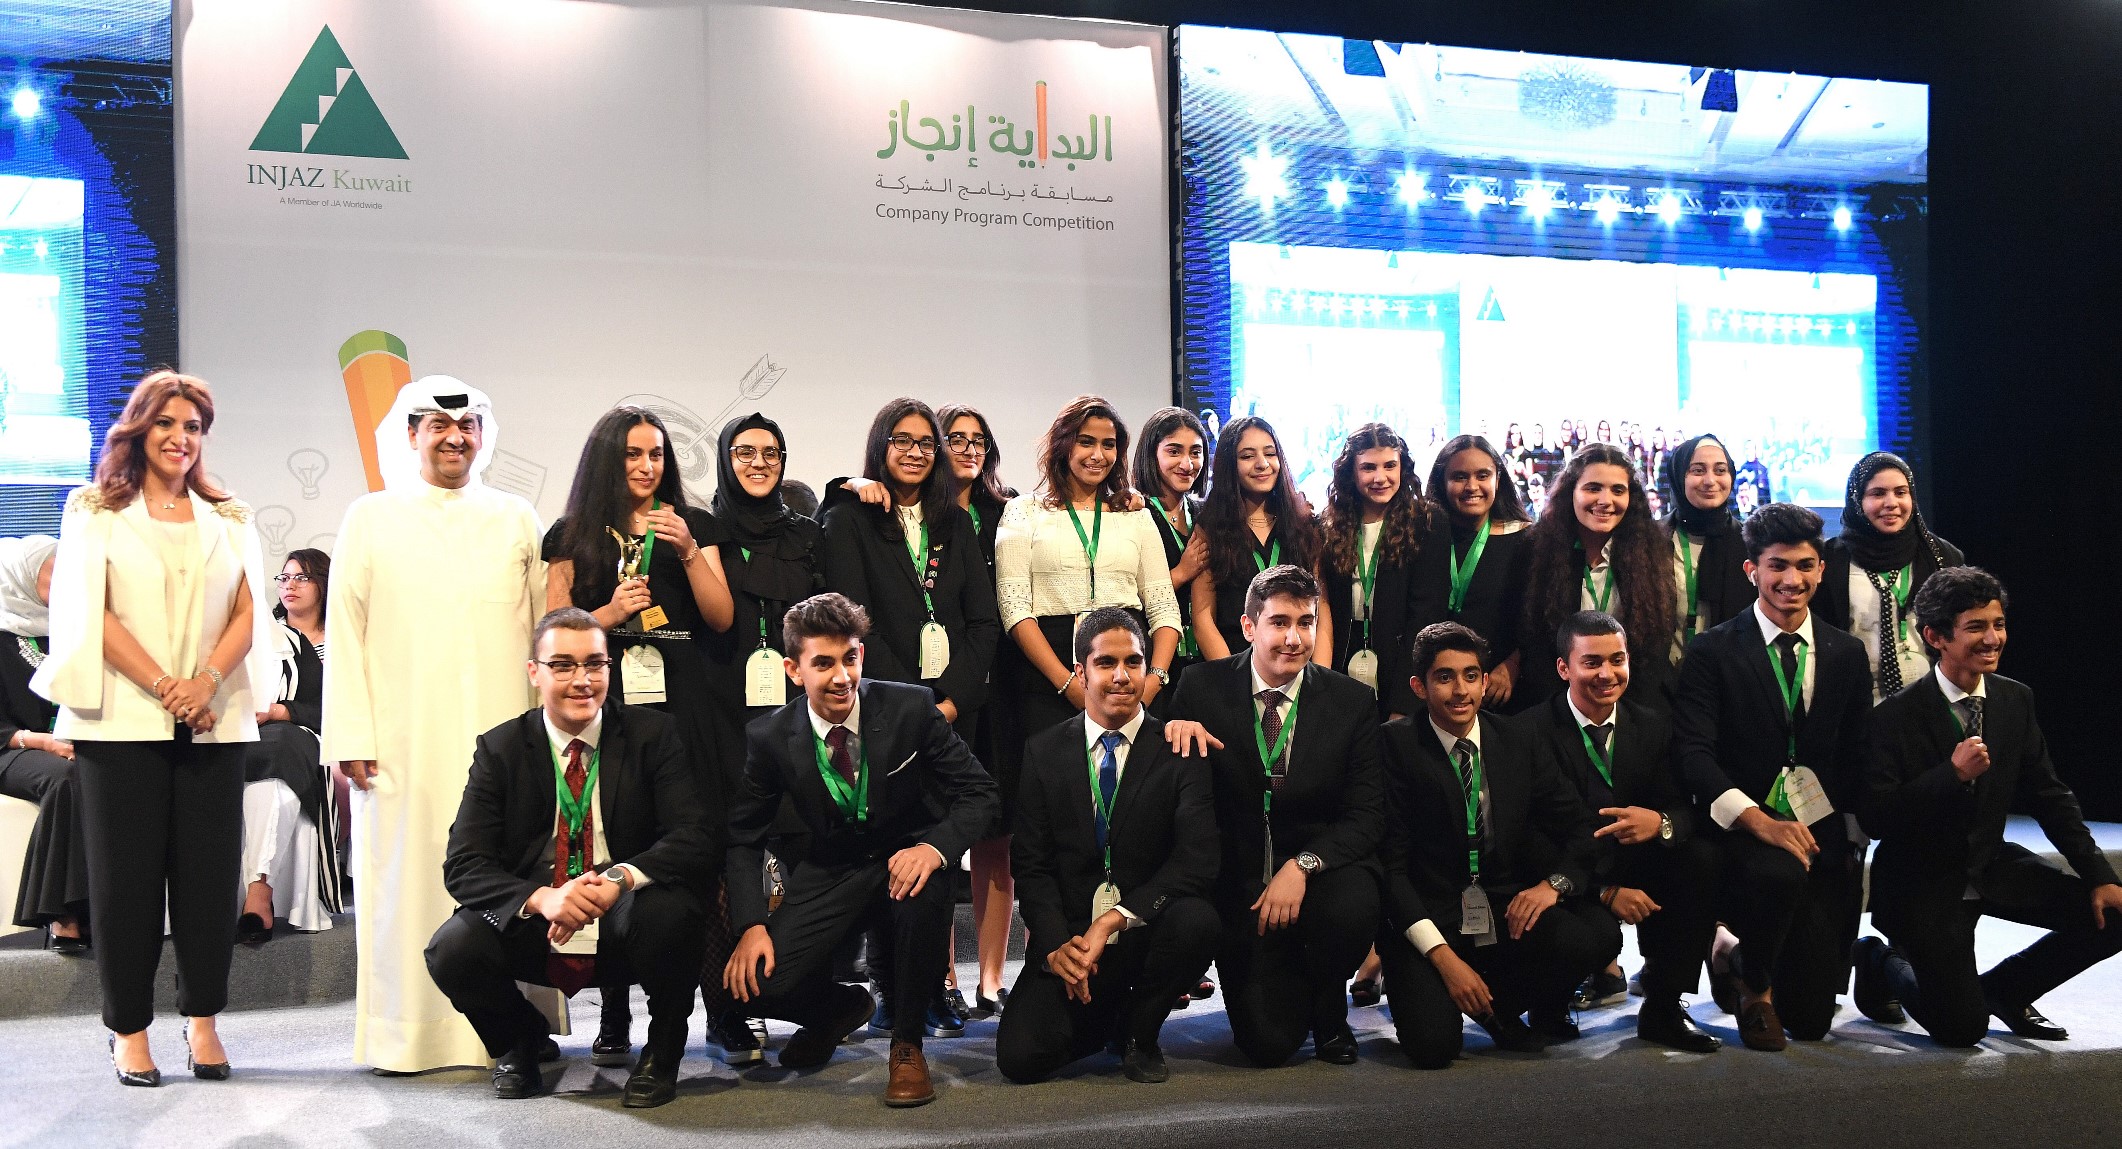 Zain participates in awarding winners of ‘Company Program’ competition 